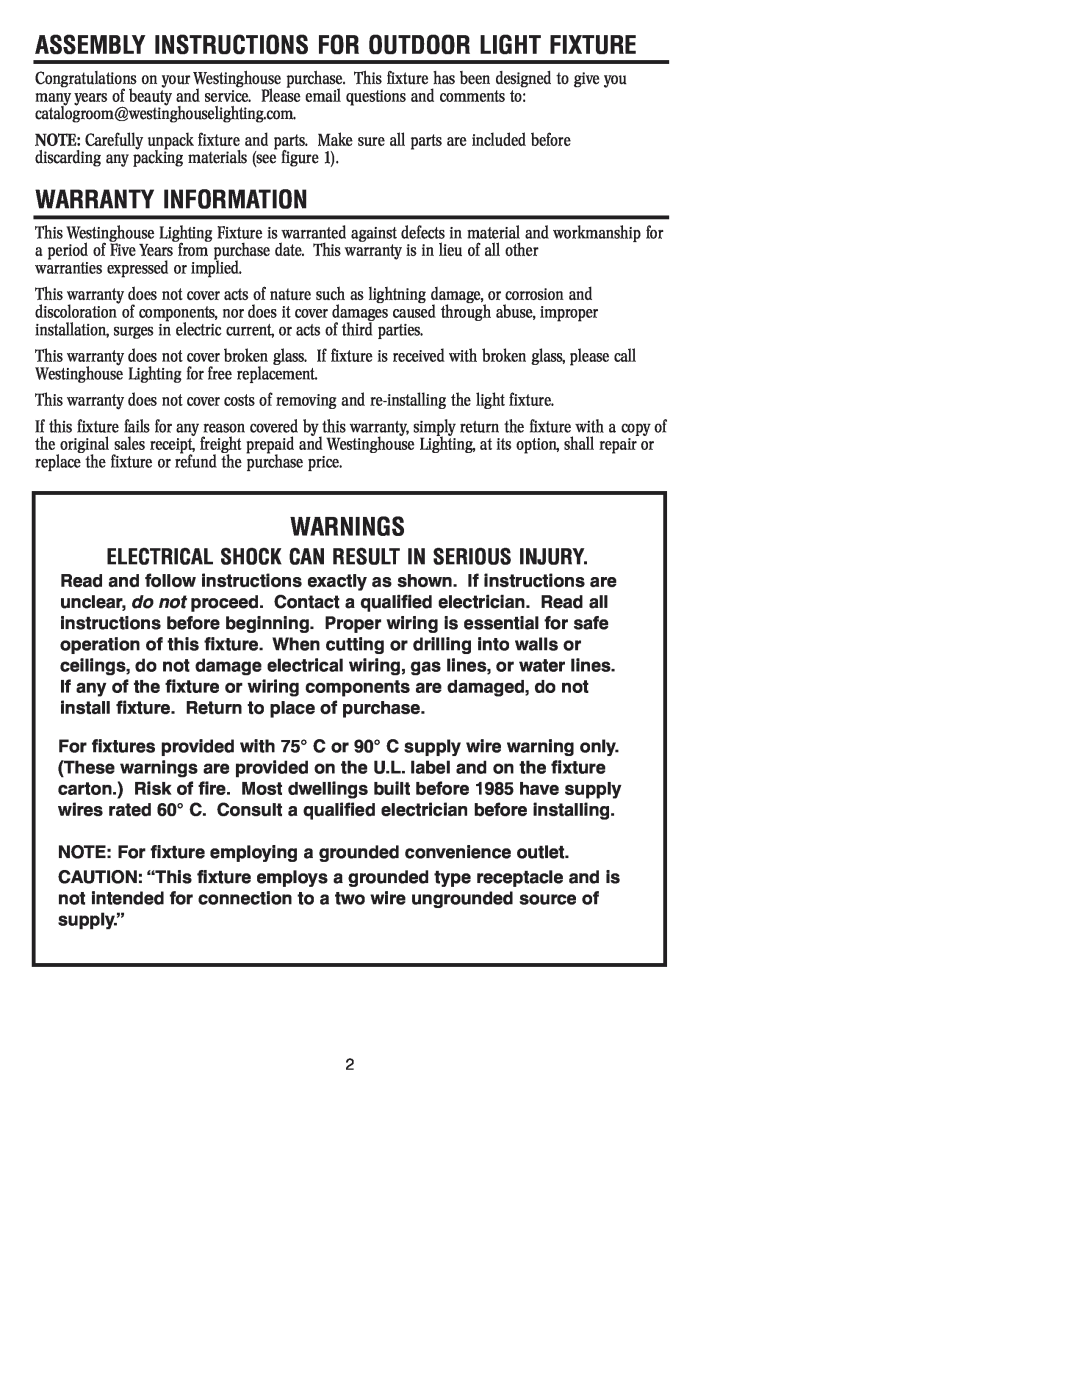 Westinghouse W-032 owner manual Warranty Information, Warnings, Assembly Instructions For Outdoor Light Fixture 